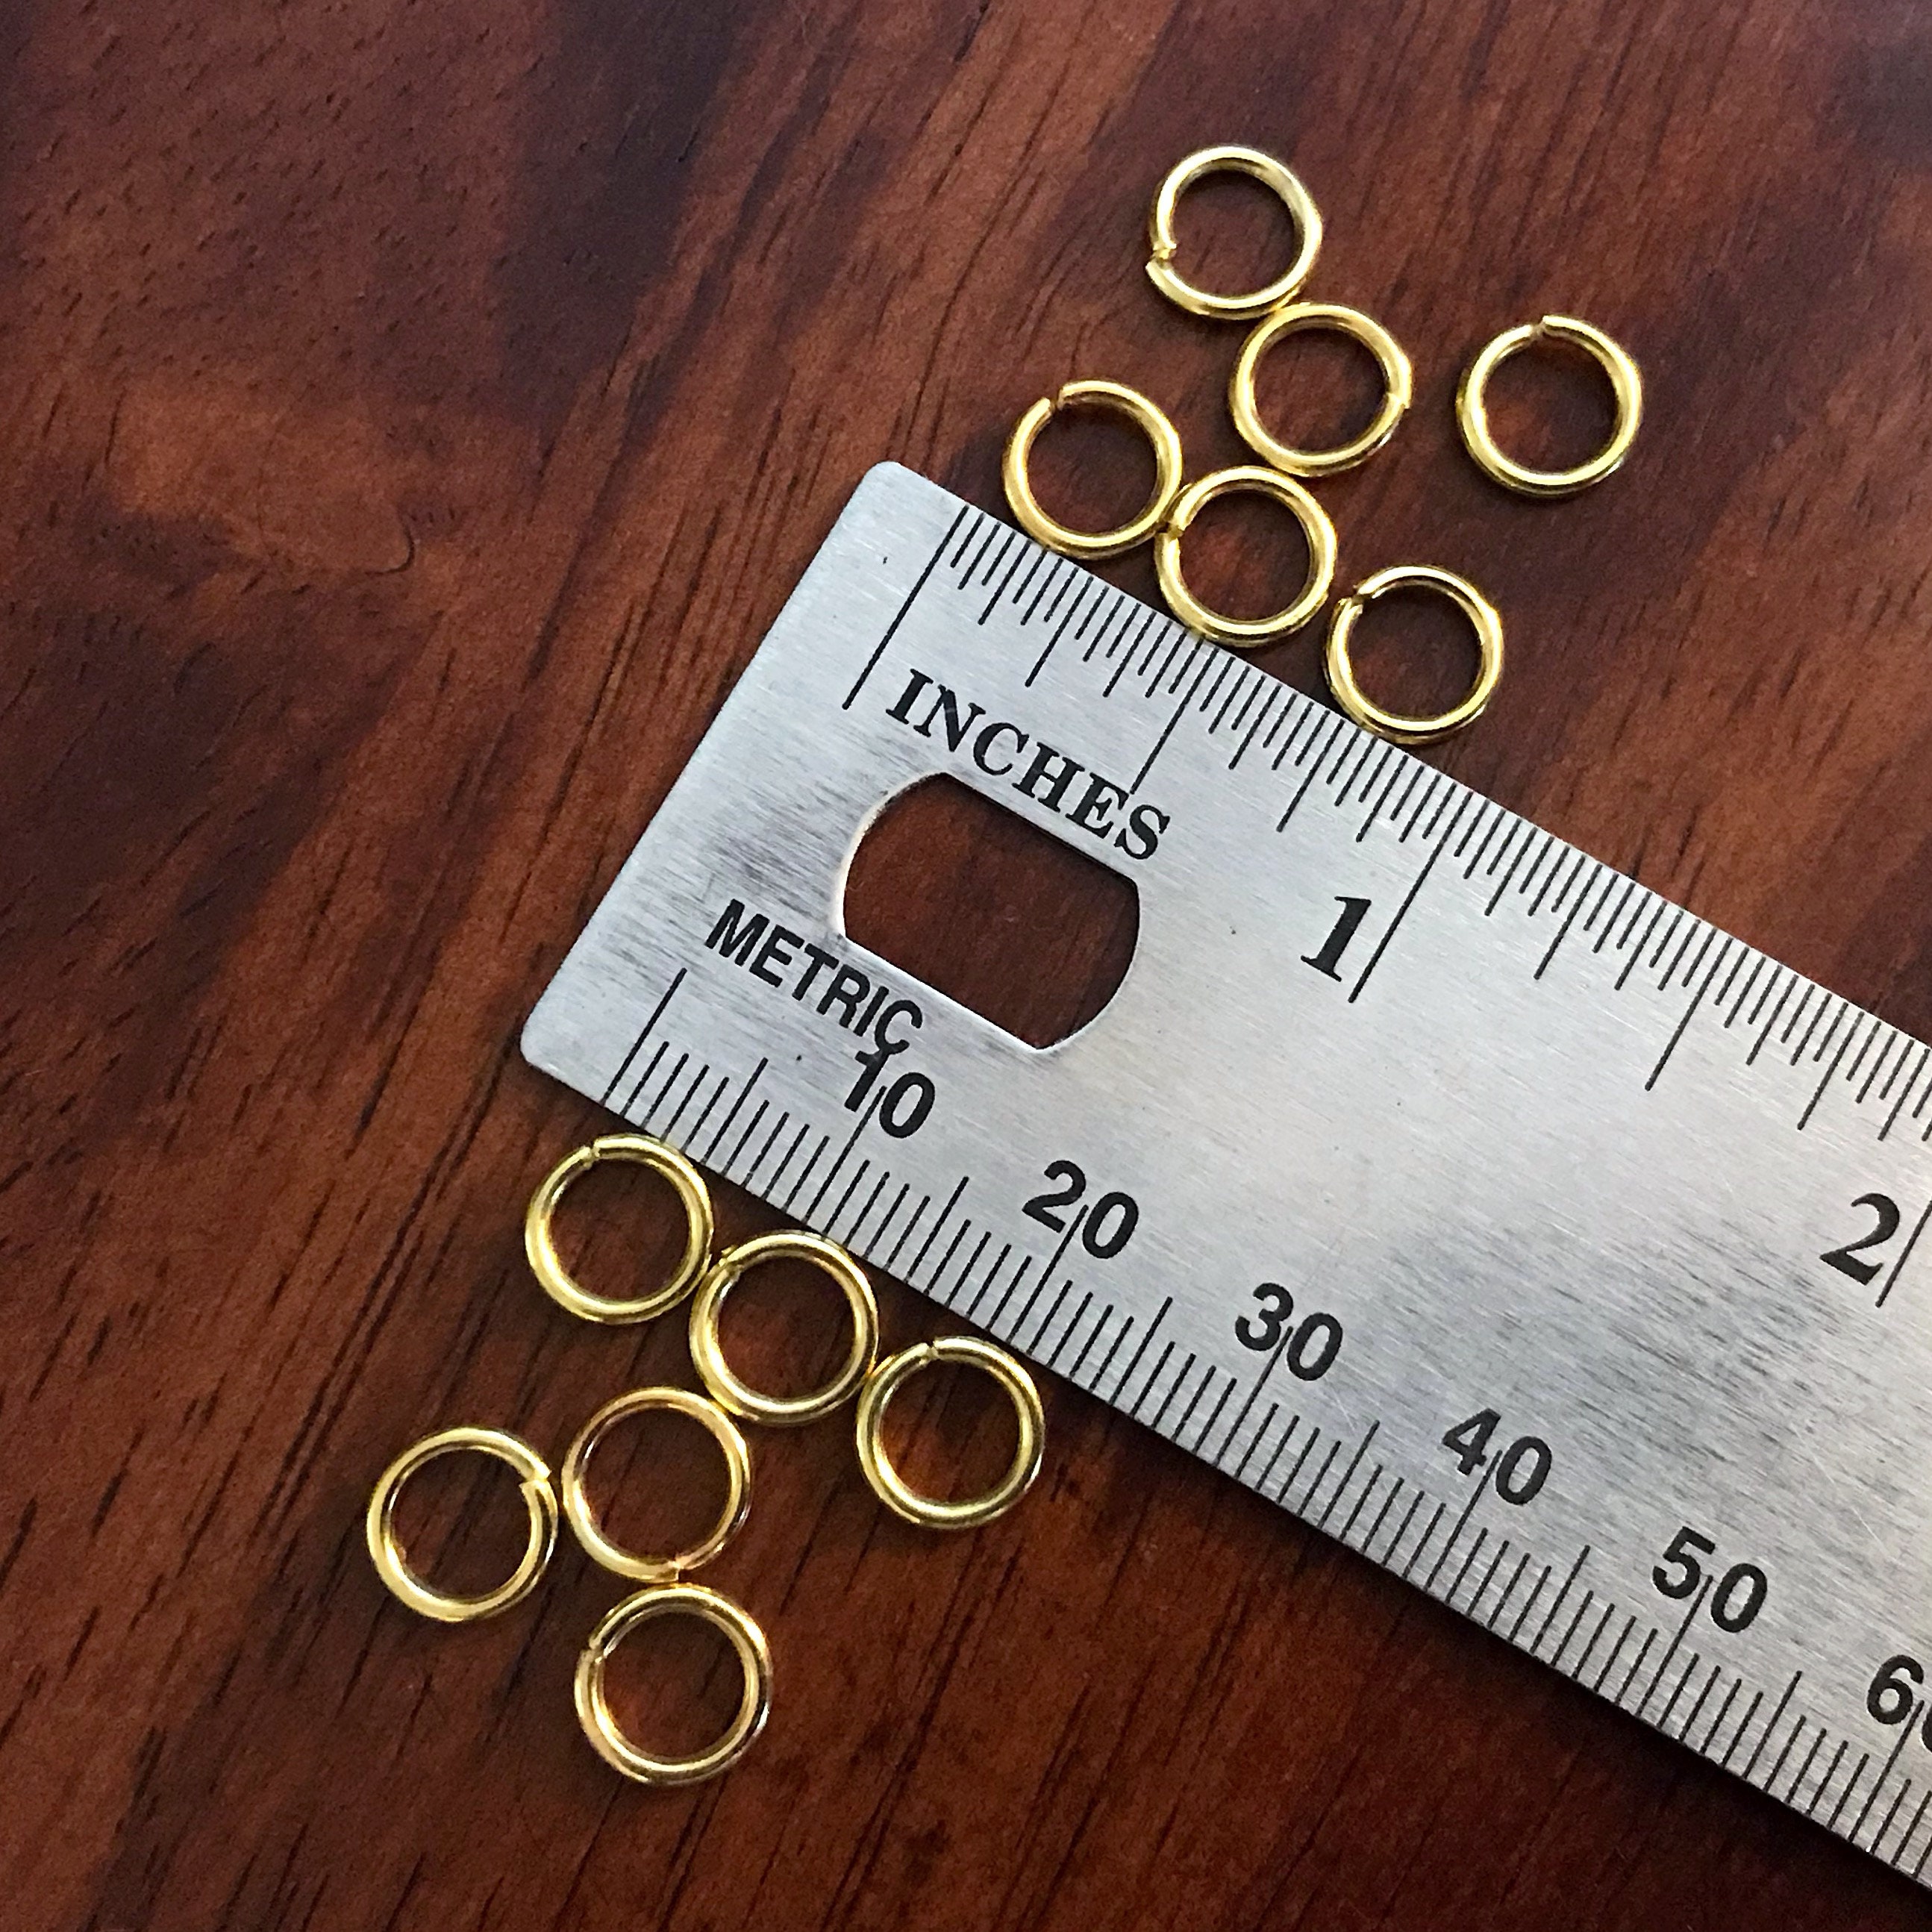 300pcs, 8x1mm Strong Jump Rings, 8mm X 1mm Gold Tone Jump Rings, Heavy Duty  8mm X 1mm Jumprings, Industrial Strength Jump Rings, Findings 